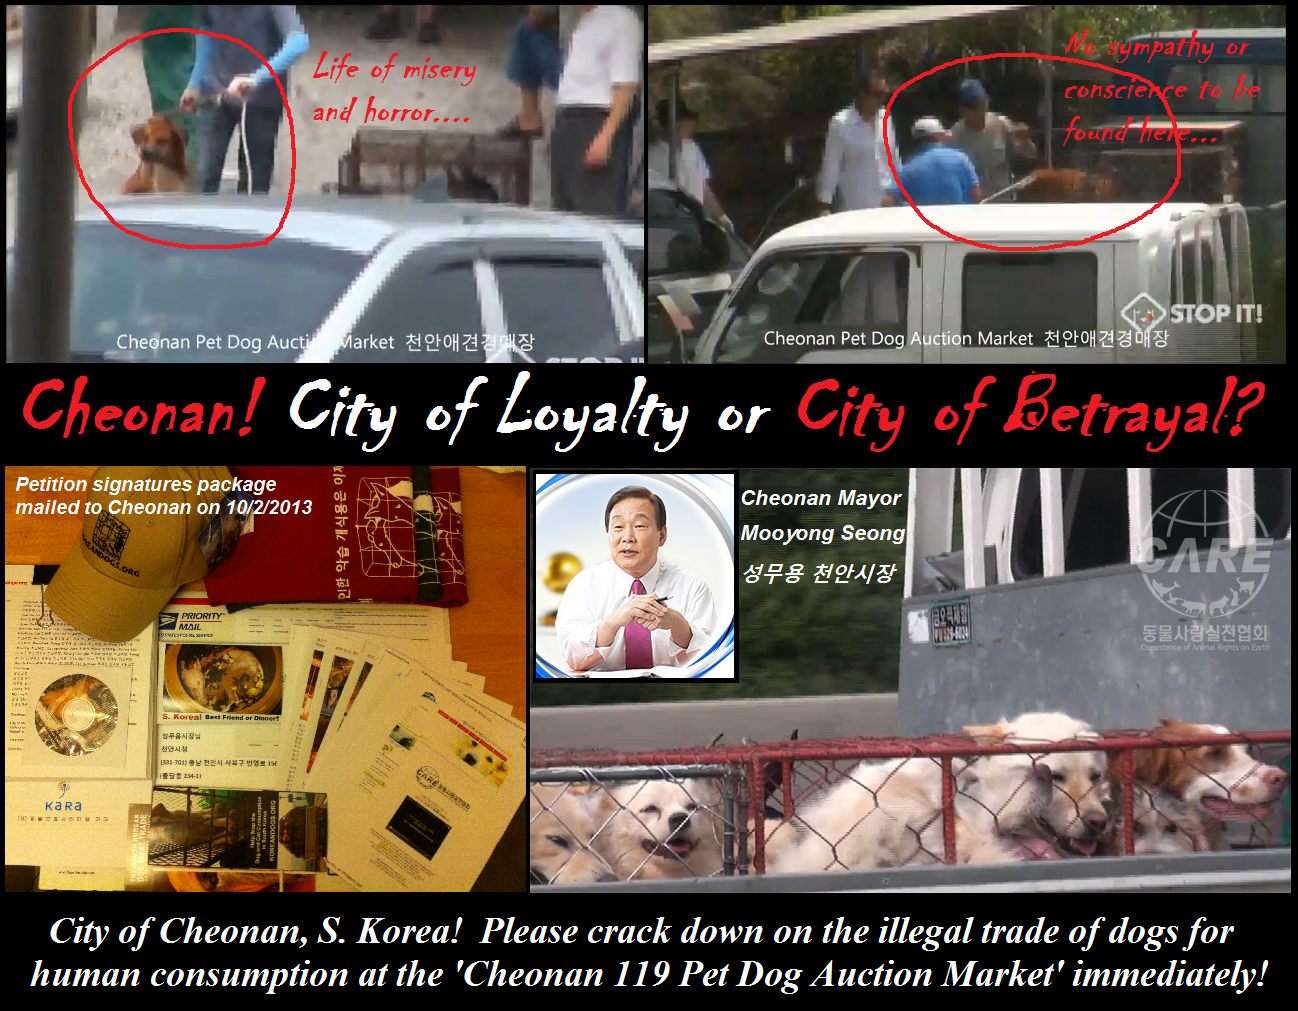 Please crack down on the illegal trade of dogs for human consumption at the